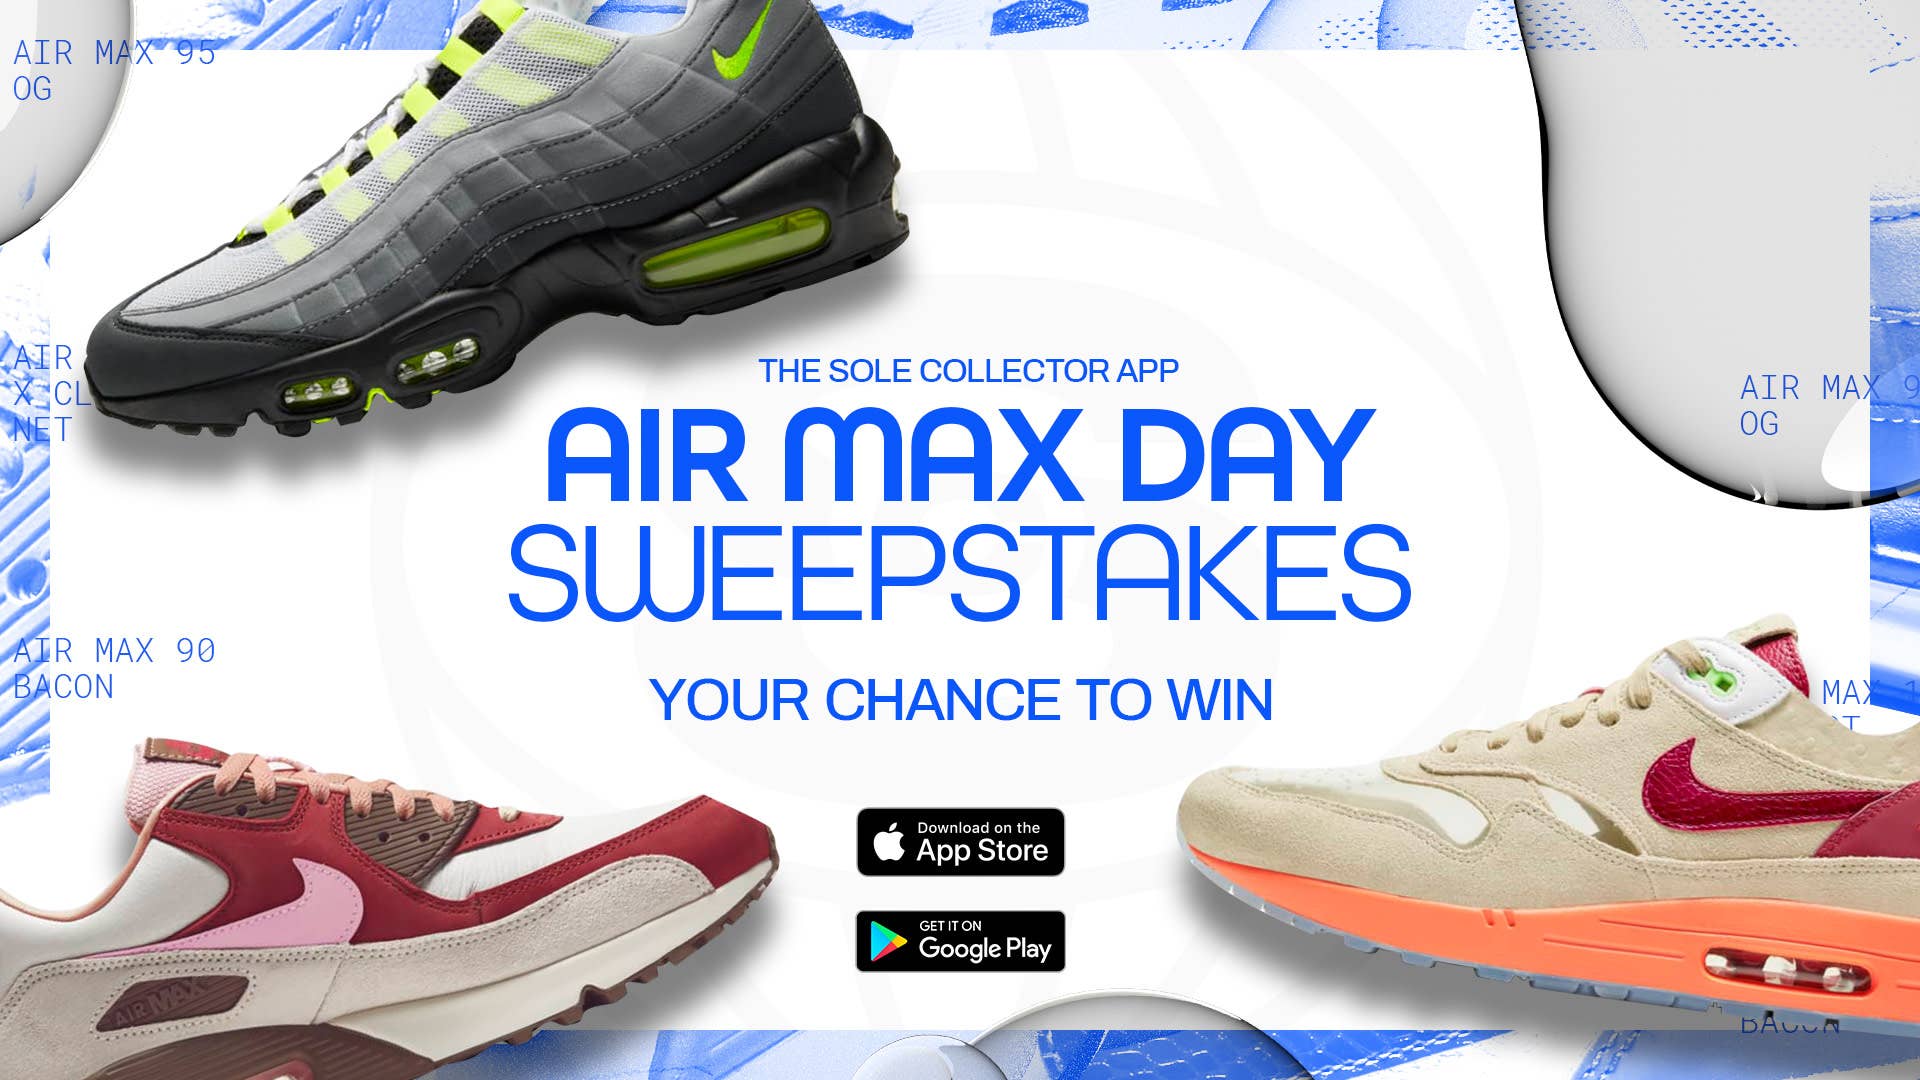 Sole Collector App Air Max Day 2021 Sweepstakes